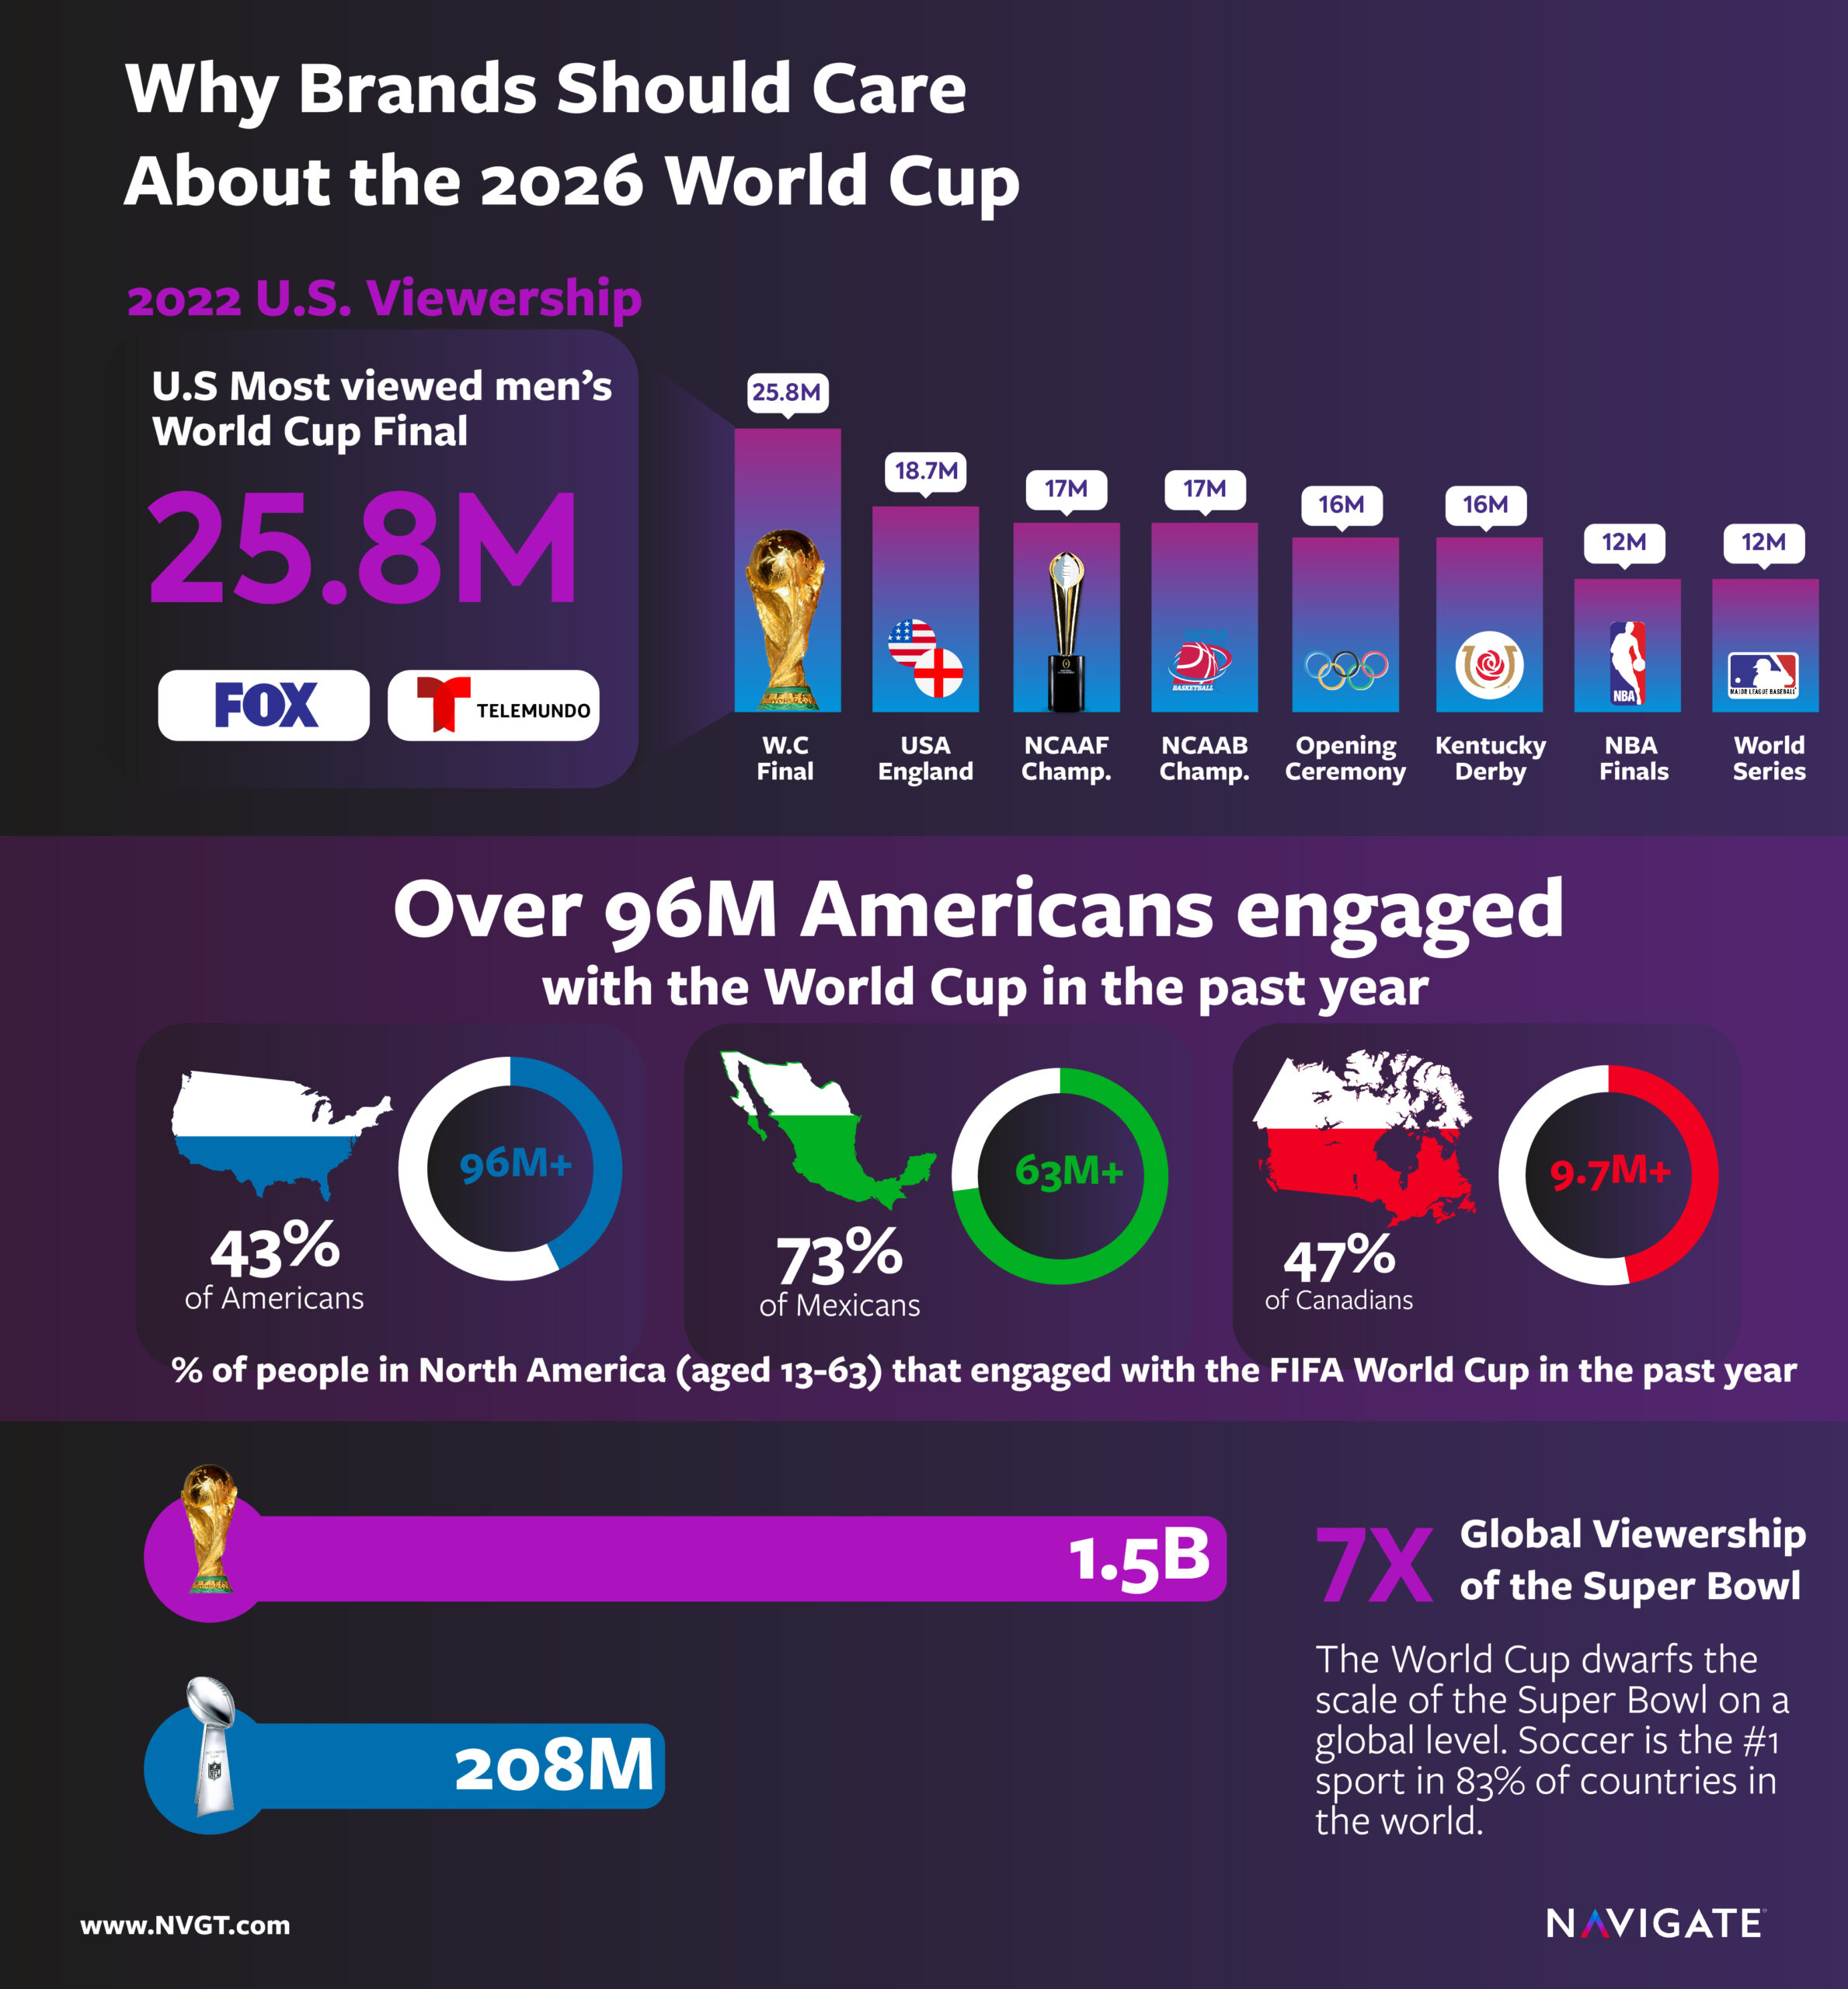 Now or Never: Why Brands Need to Maximize the Lead-up to the 2026 World ...